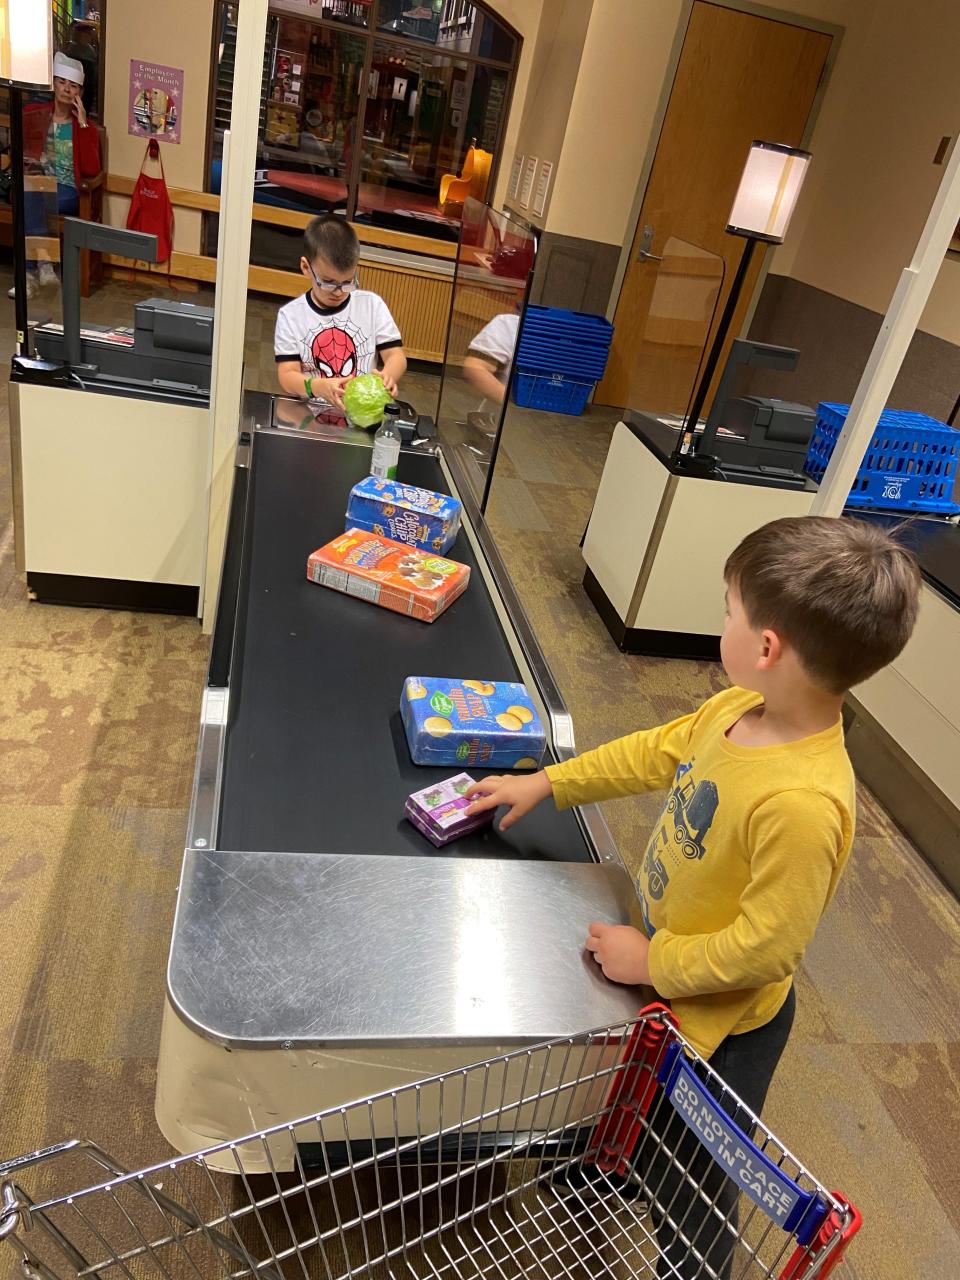 Renovations to the Wegmans Super Kids Market exhibit at The Strong National Museum of Play will include a fresh coat of paint, new carpets and shopping carts, and updated activity areas.